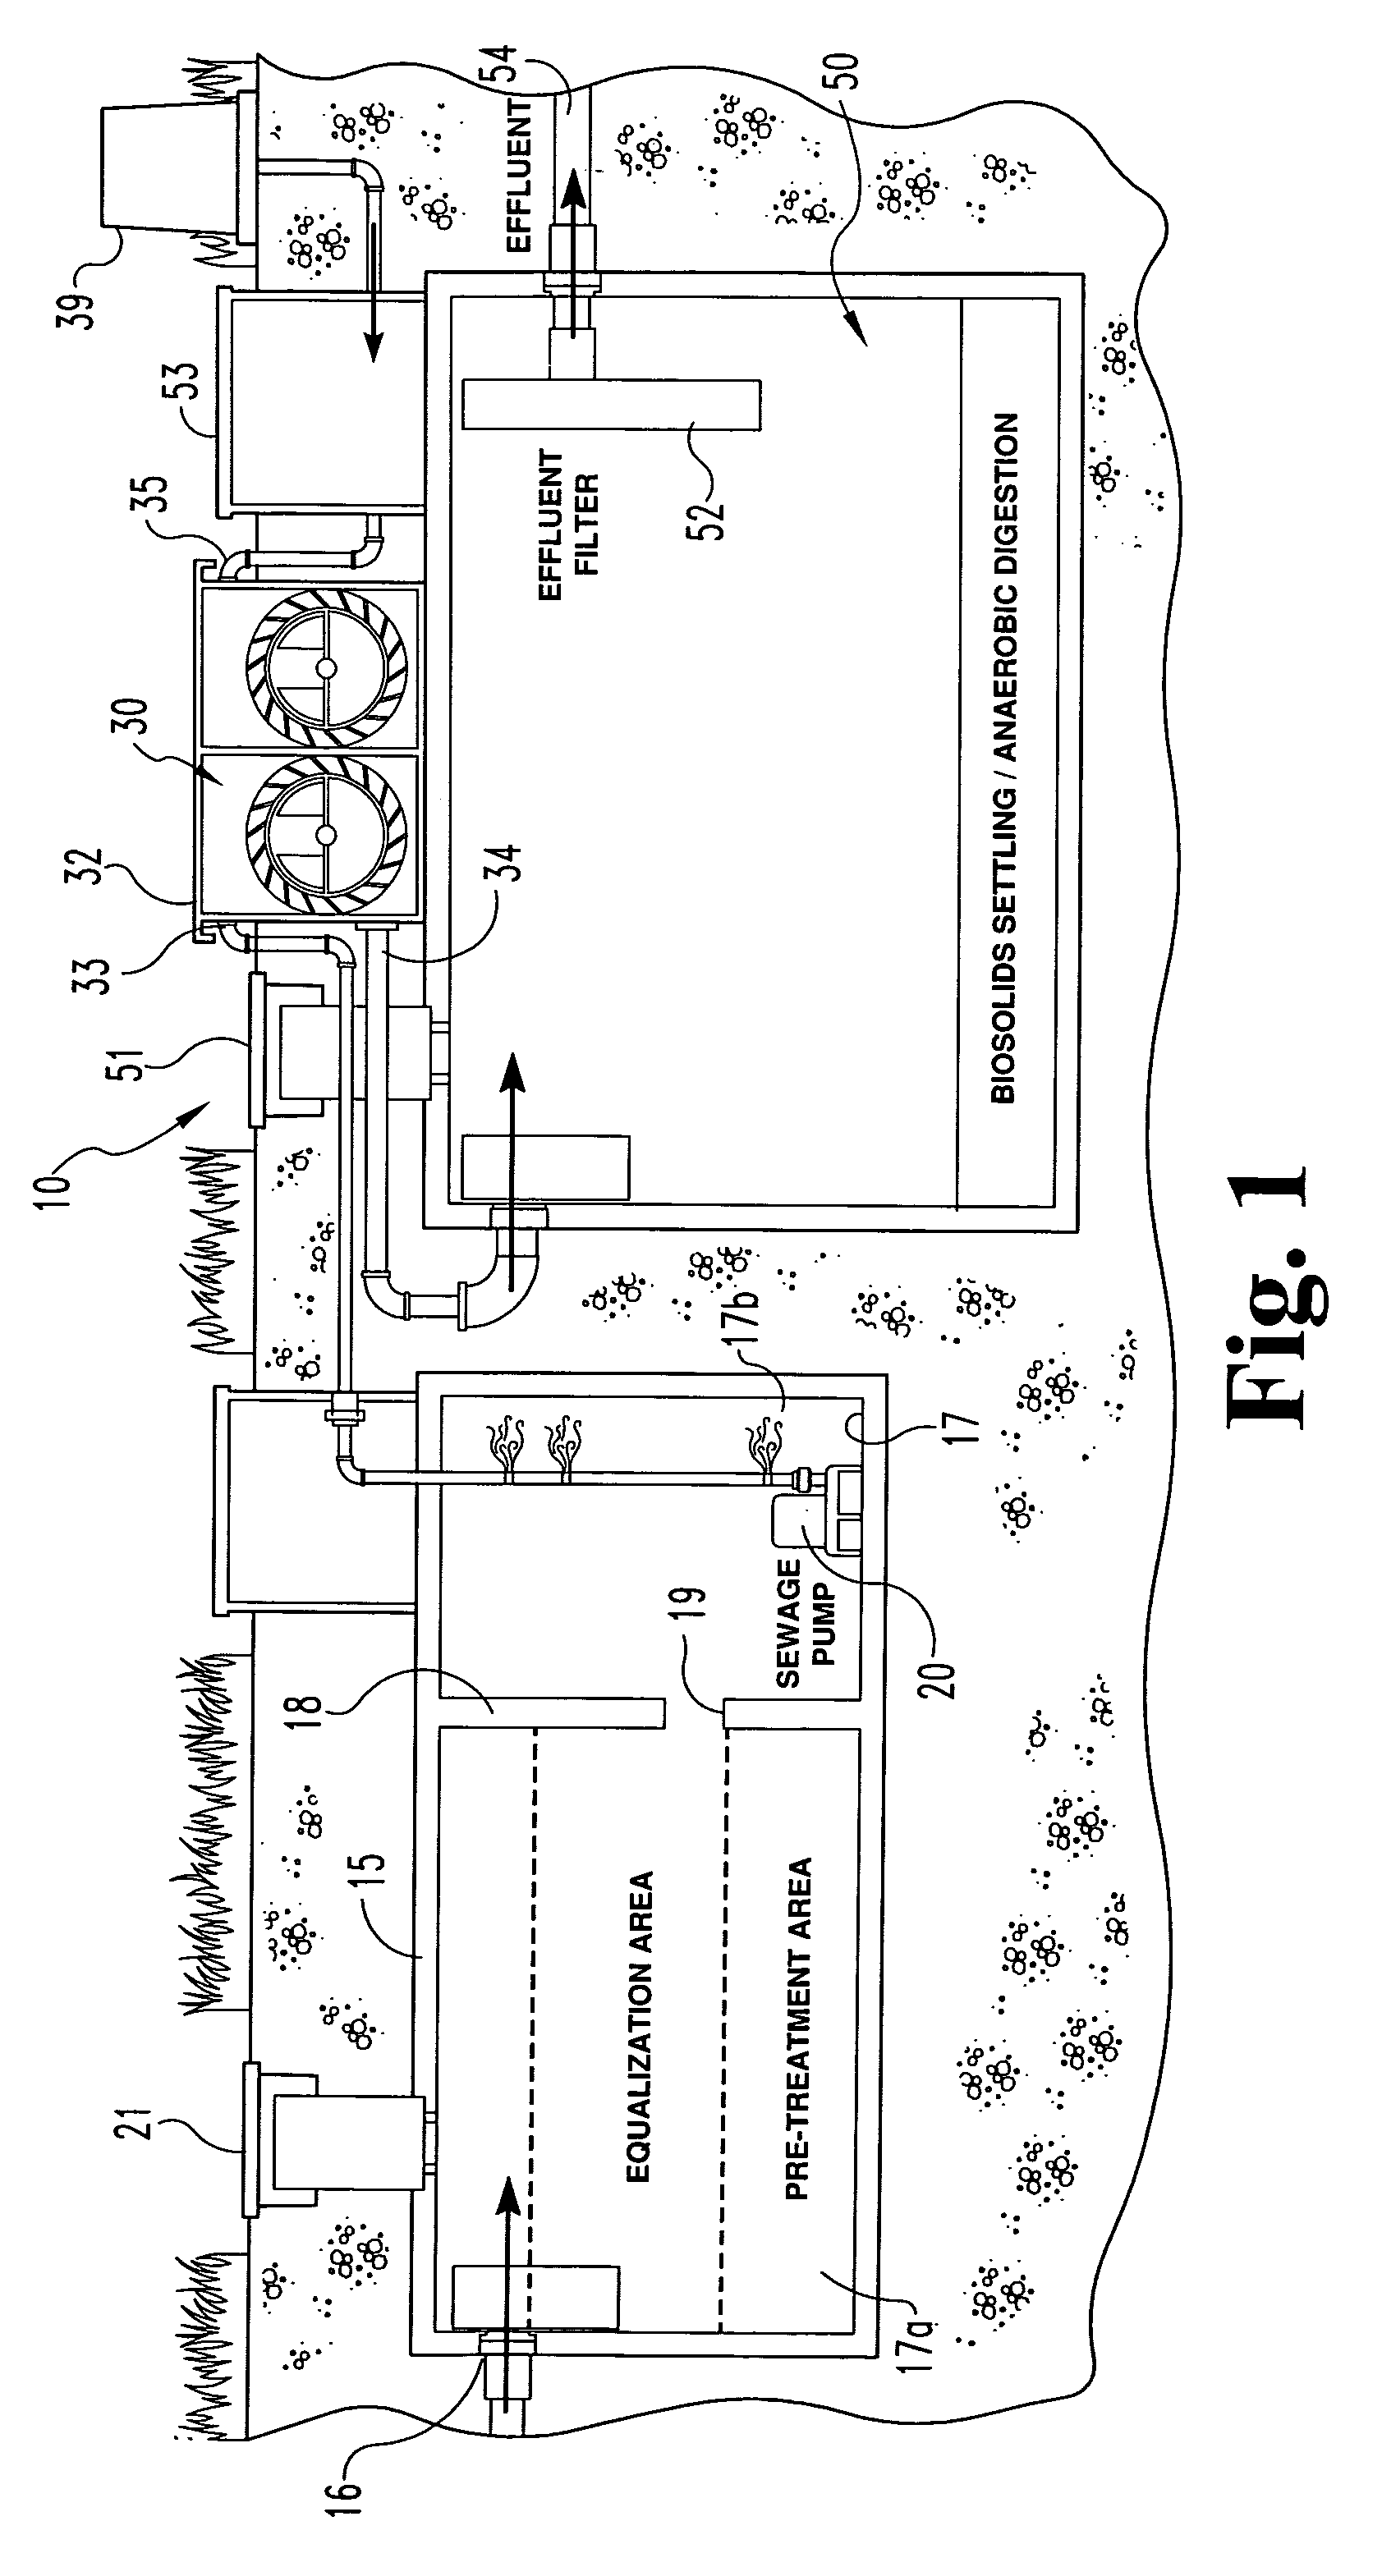 System and method for biological wastewater treatment and for using the byproduct thereof